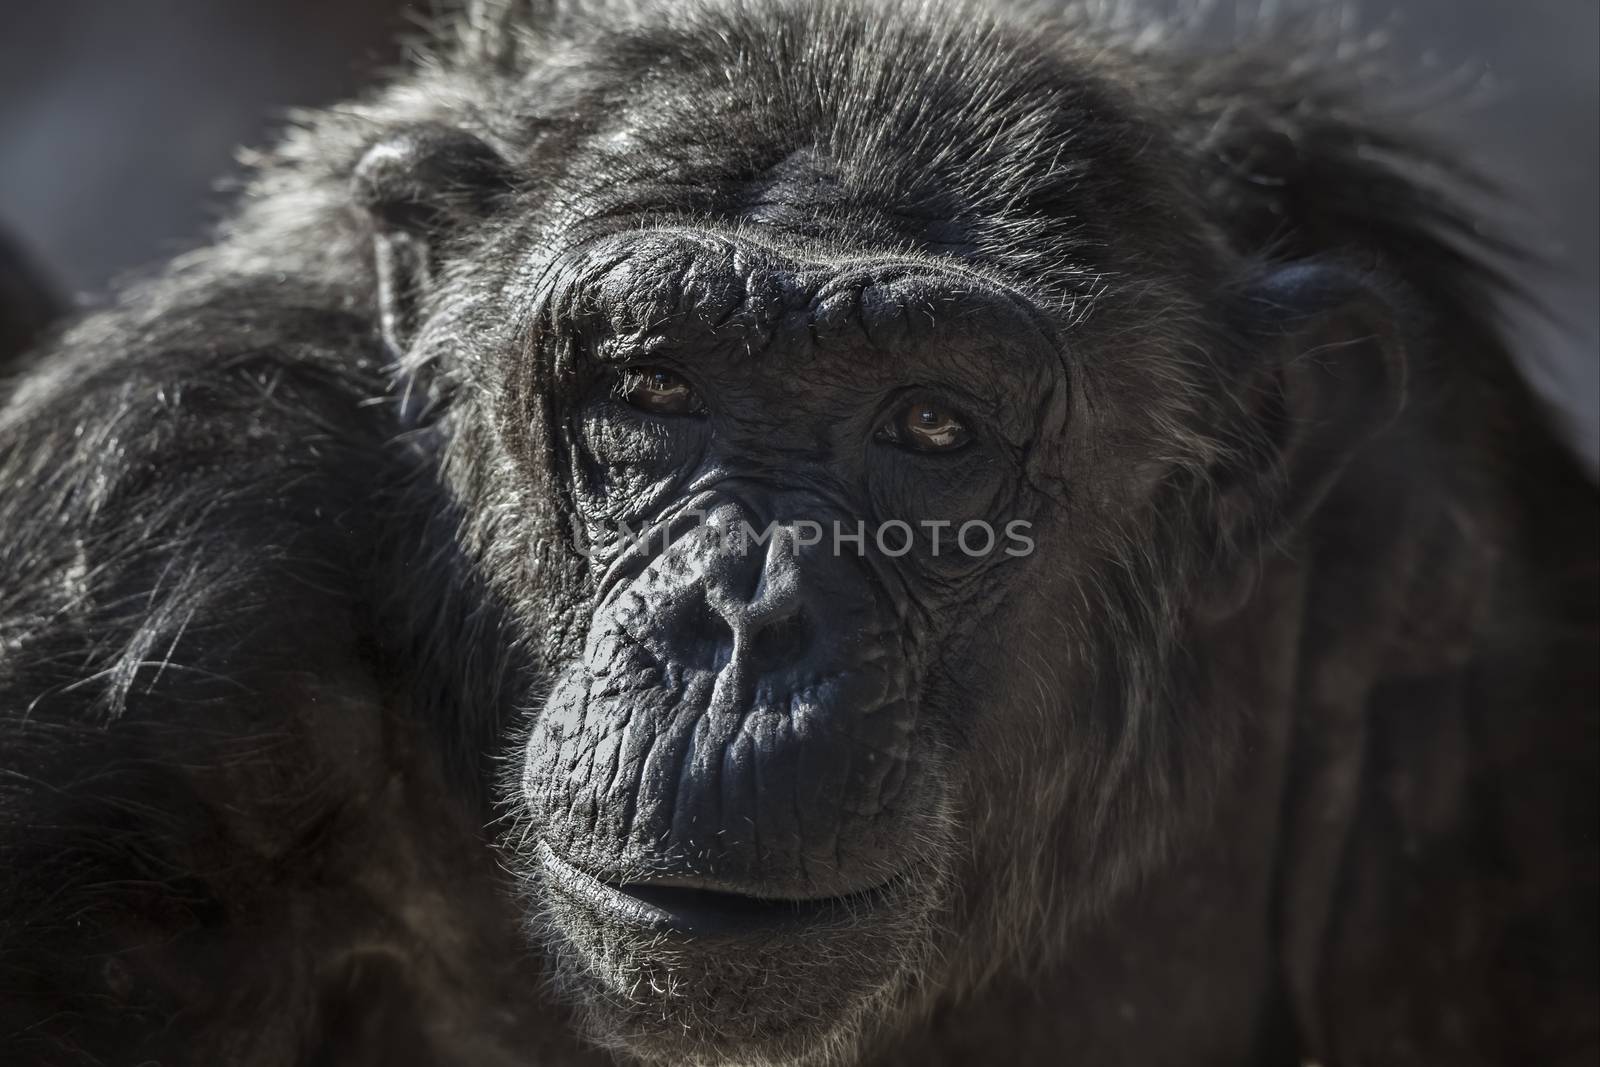 Old chimpanzee portrait at the zoo Barcelona, in Spain